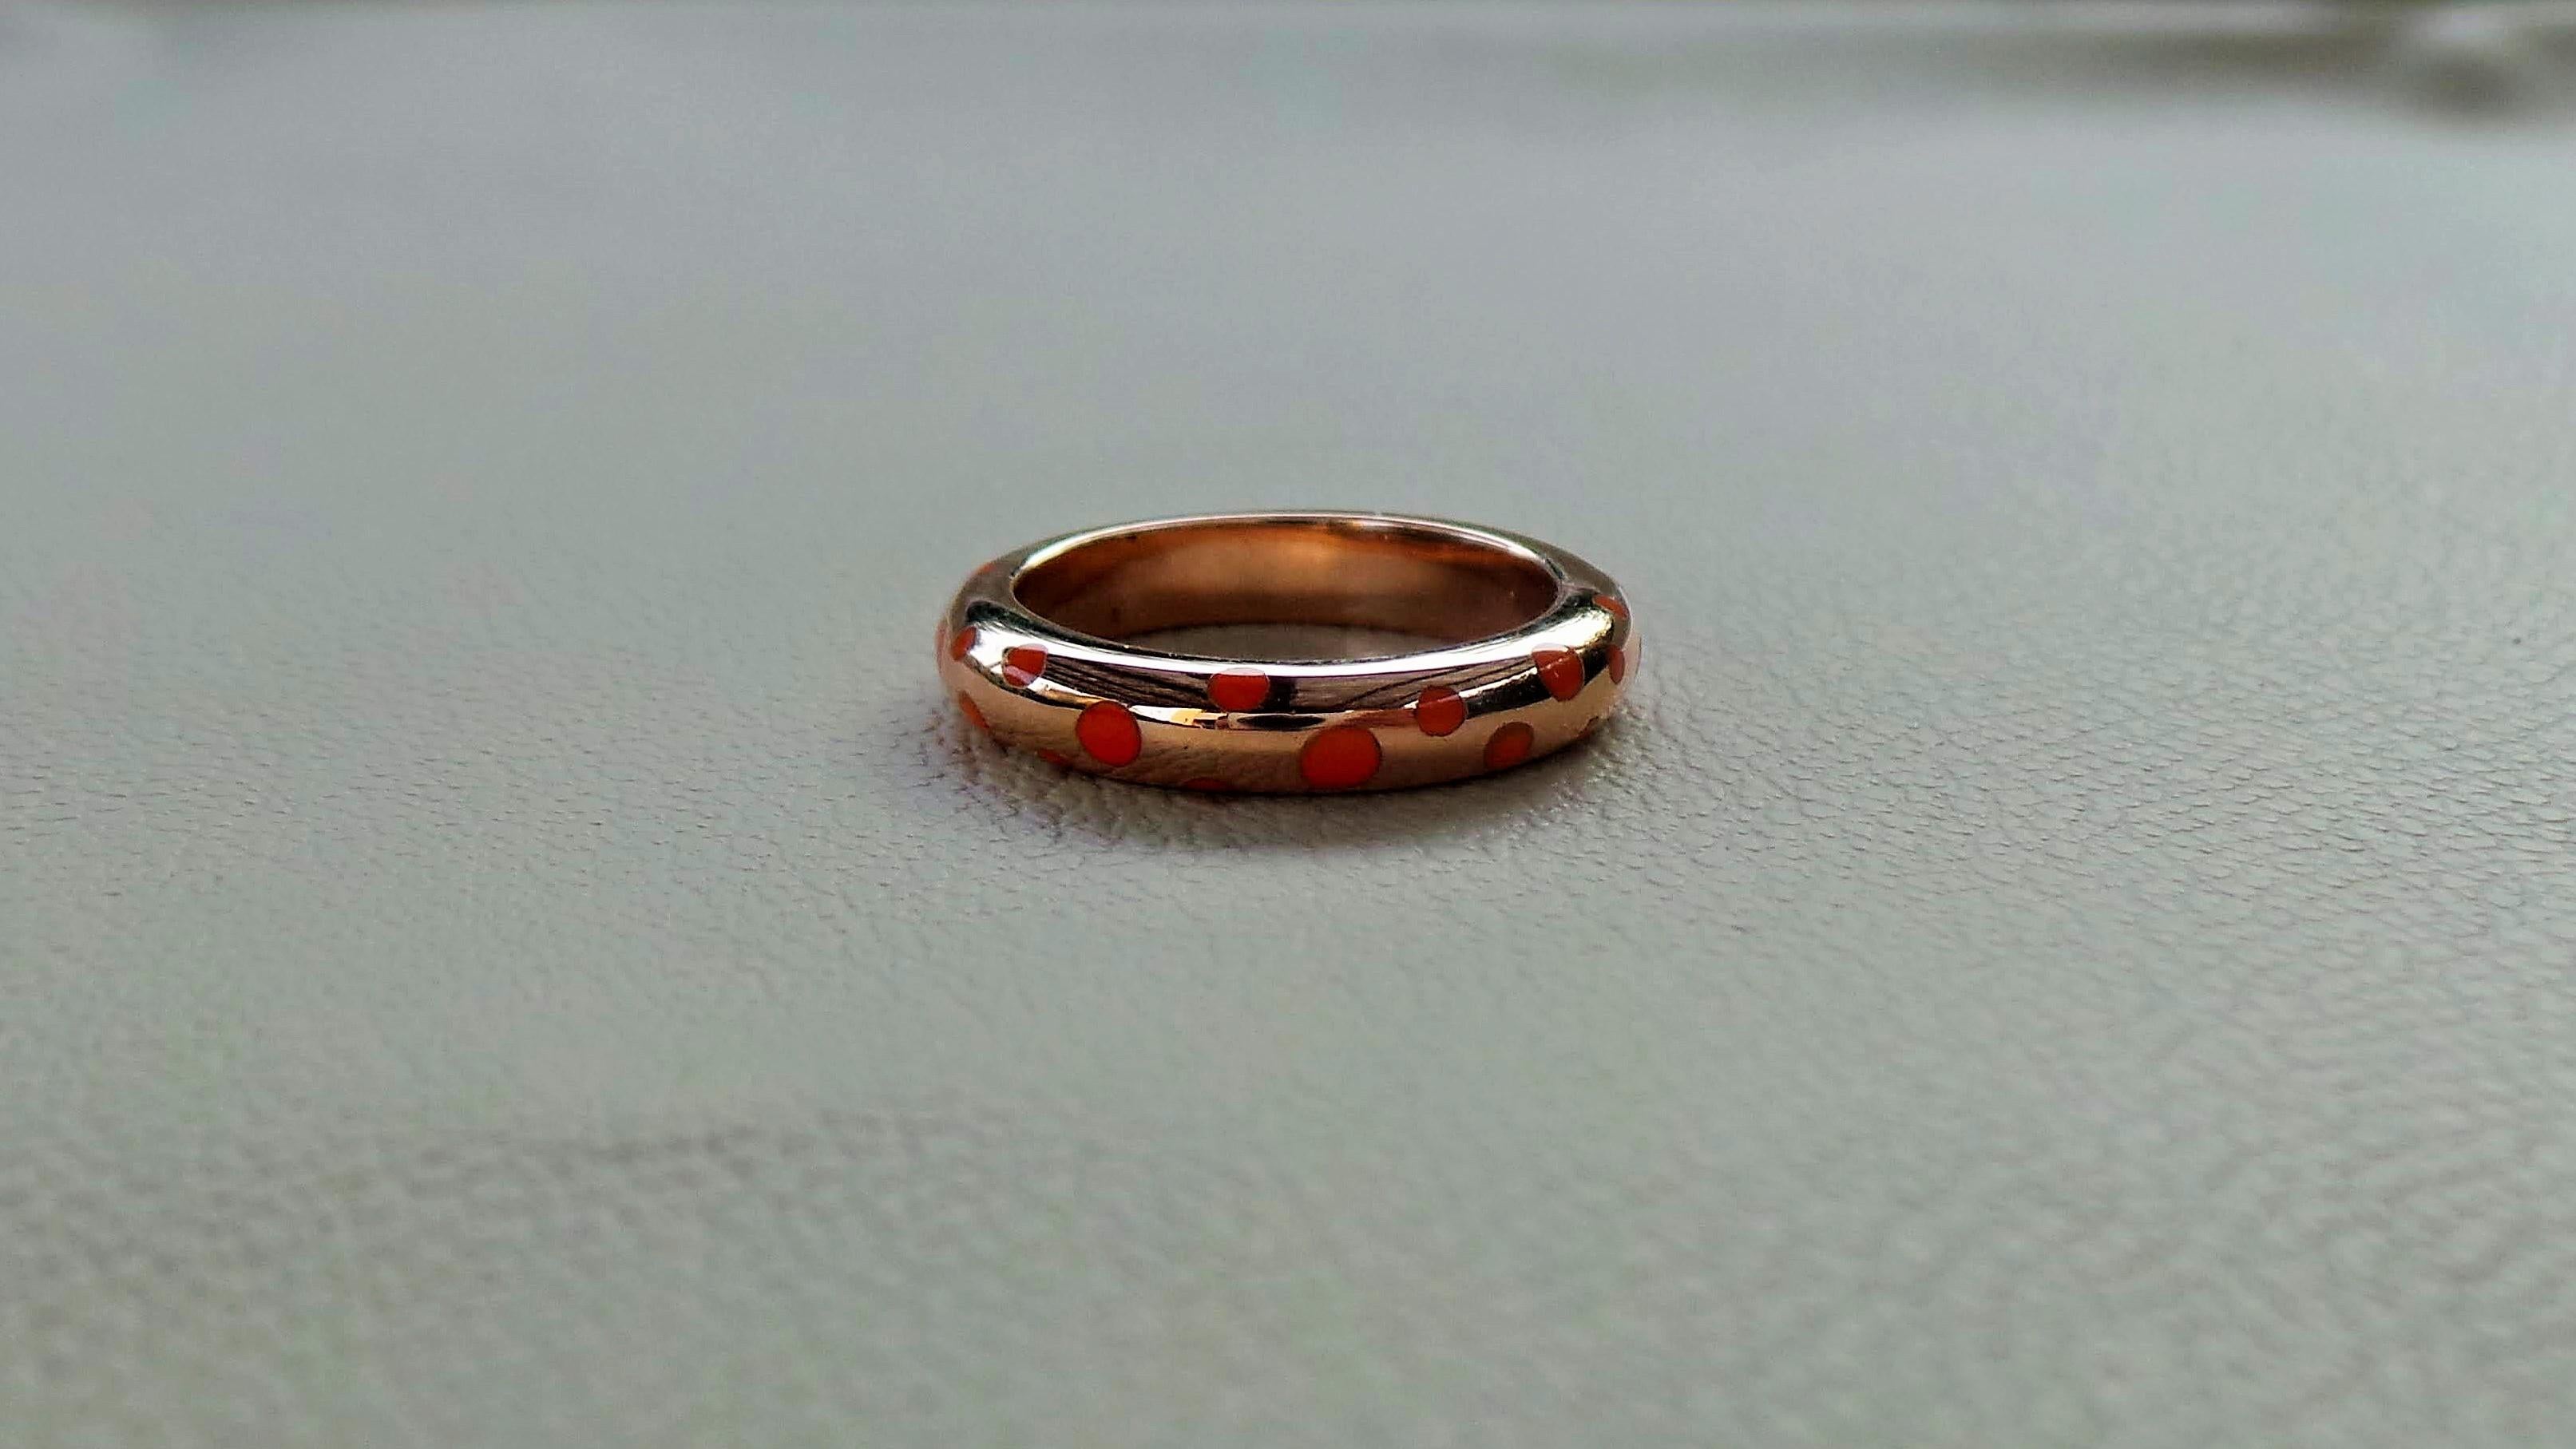 Andrea Macinai create a dedicated collection for stackable rings with enamel disegn.
Ring with clean and modern lines ,one line in rose gold. 
We're a workshop so every piece is handmade, customizable and resizable. Feel free to contact us for any